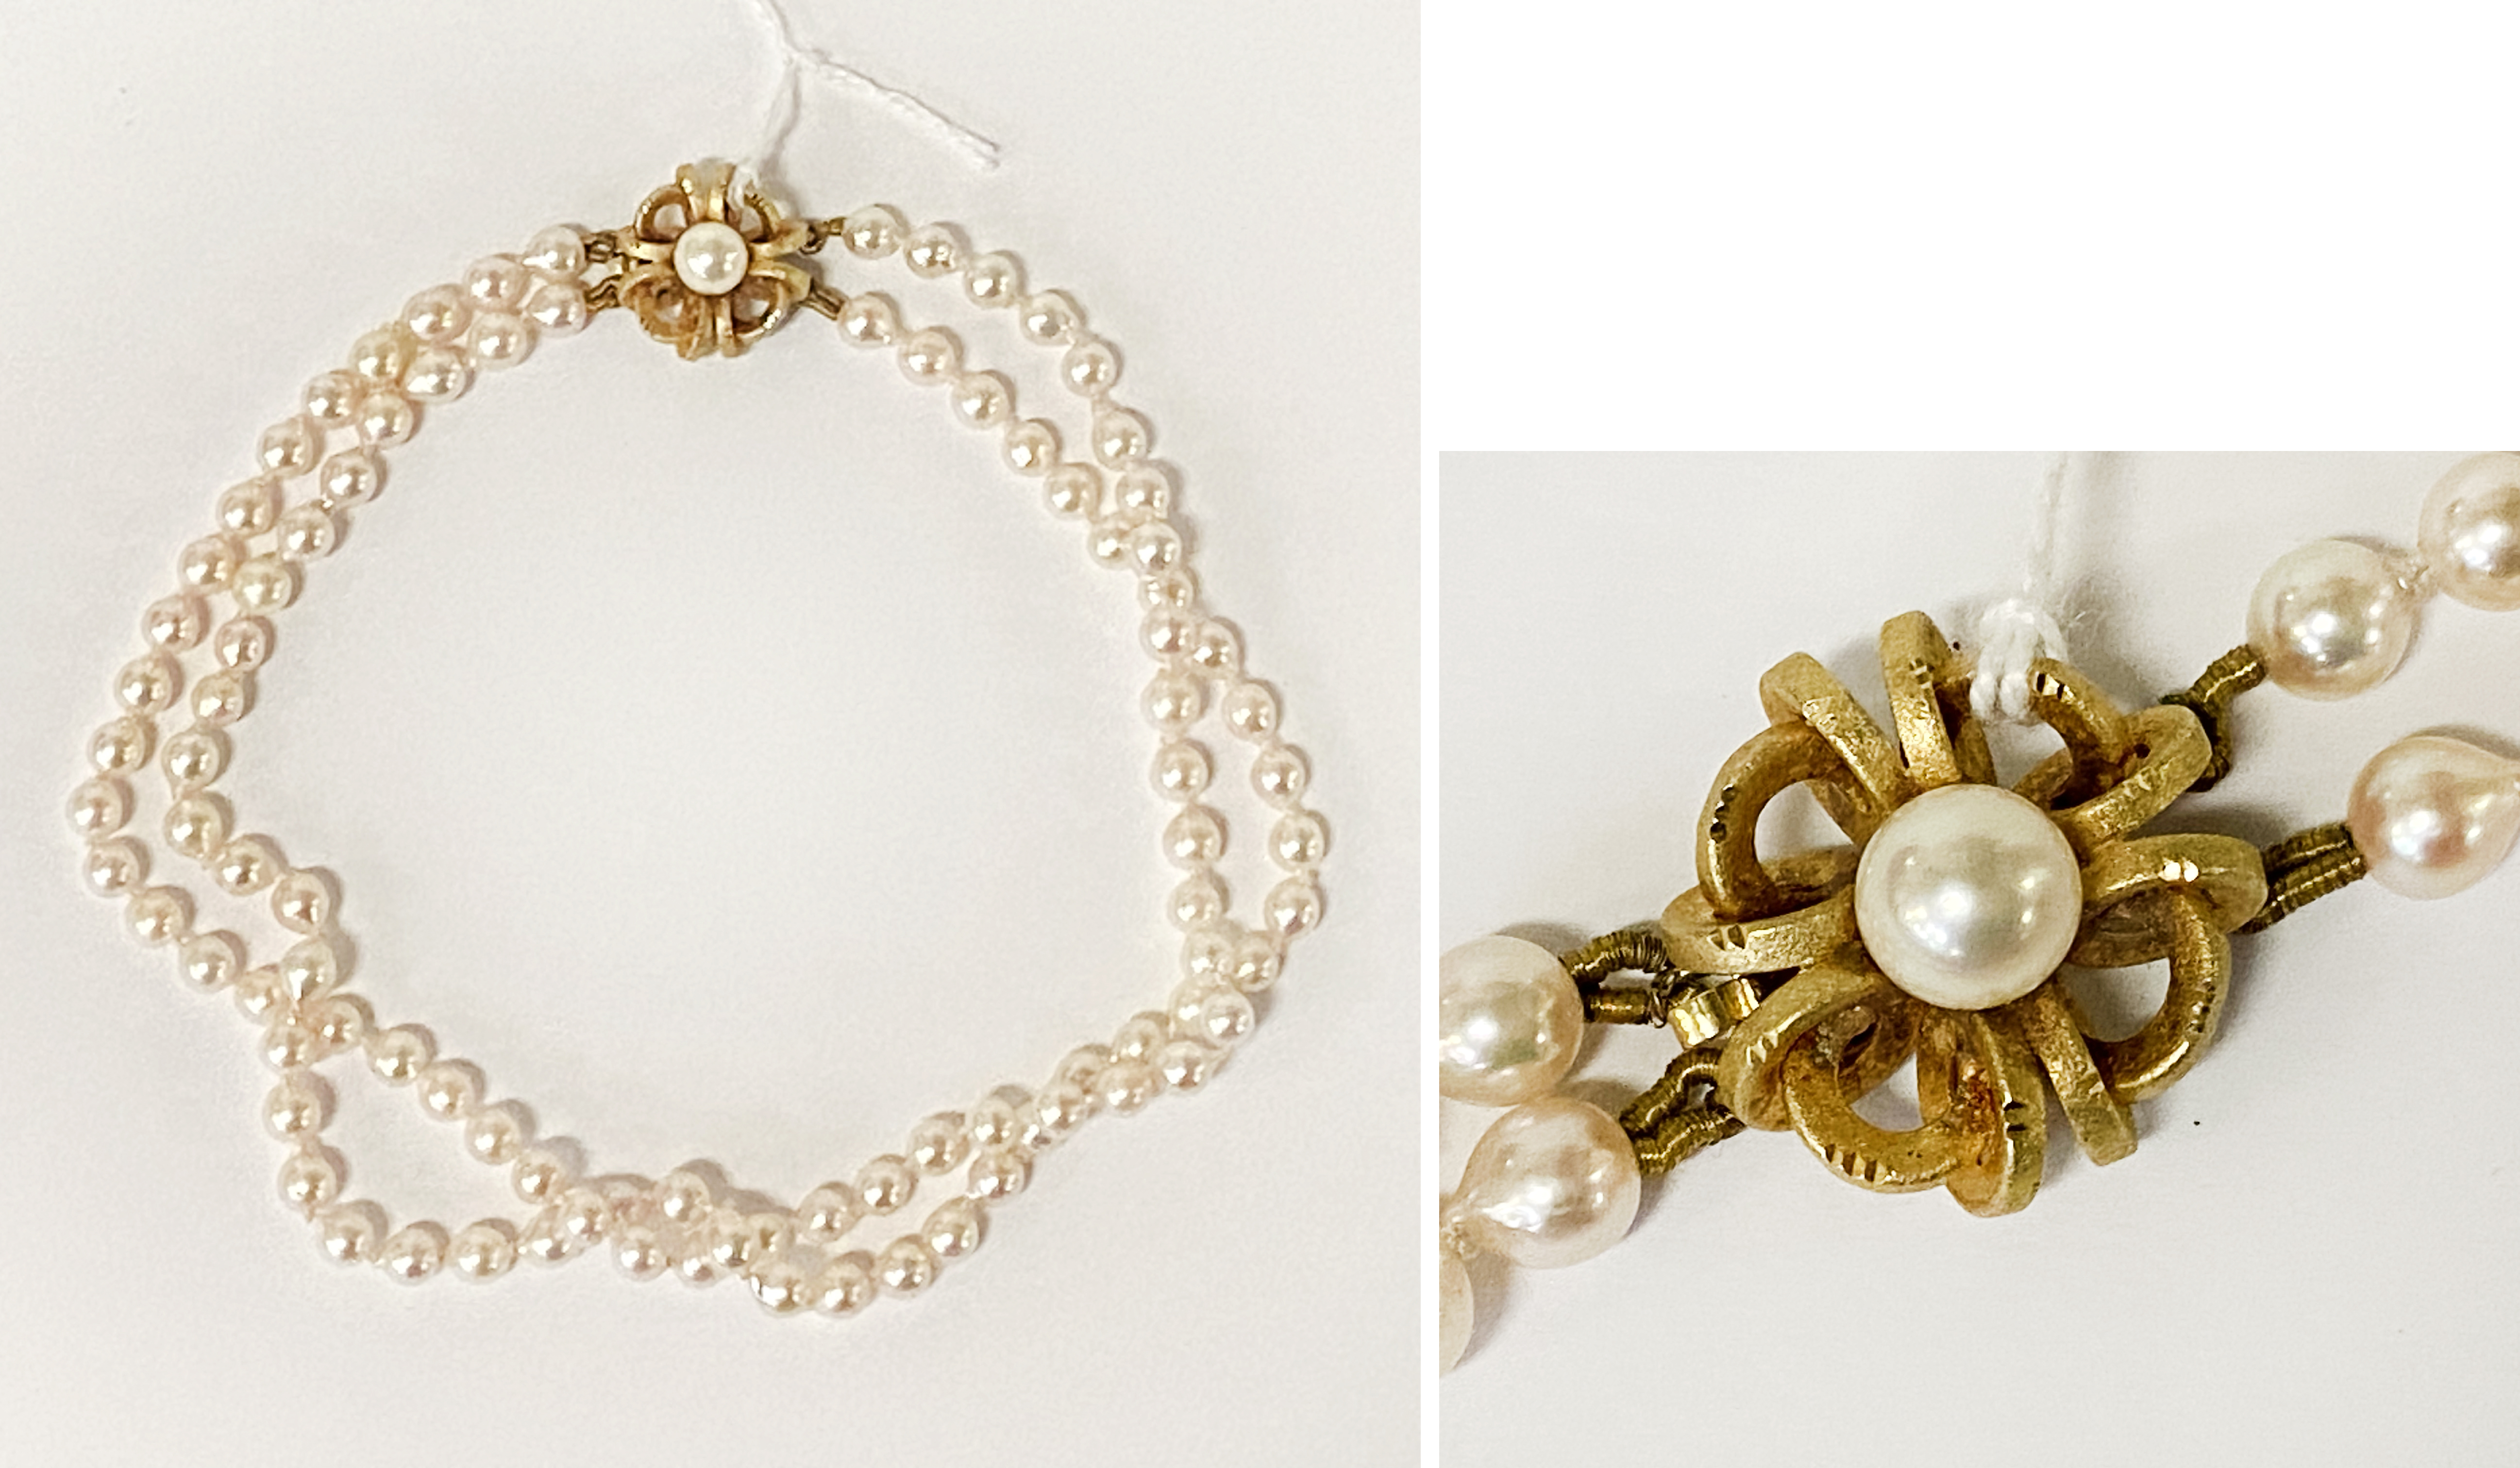 PEARL CHOKER NECKLACE WITH GOLD CLASP